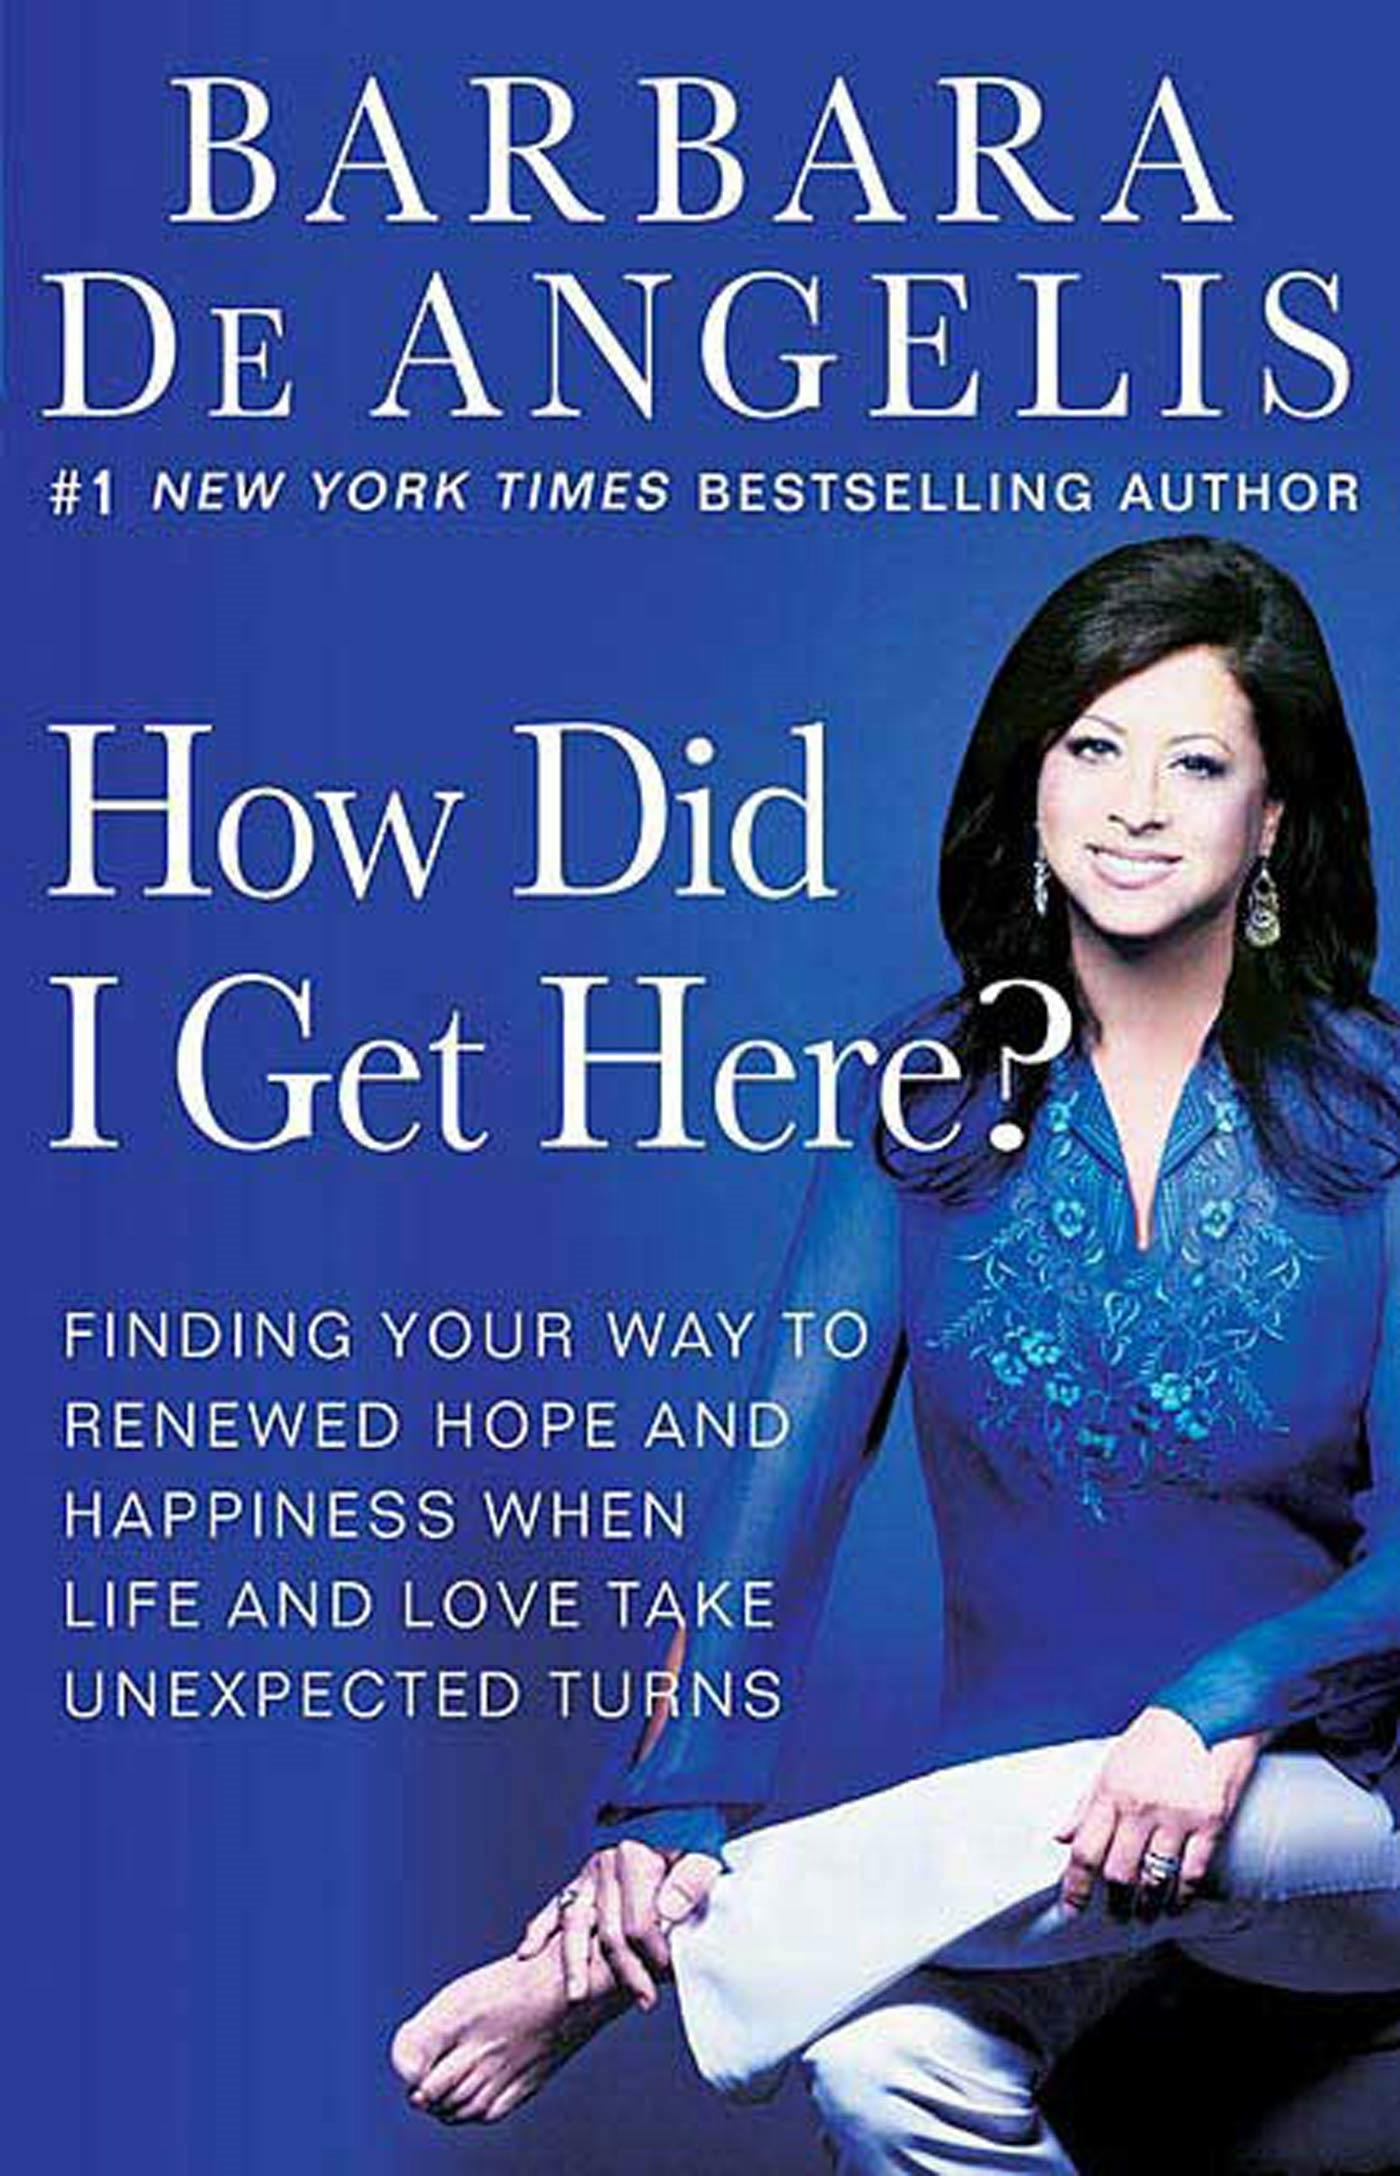 Wherever I Wind Up: My Quest for Truth, Authenticity and the